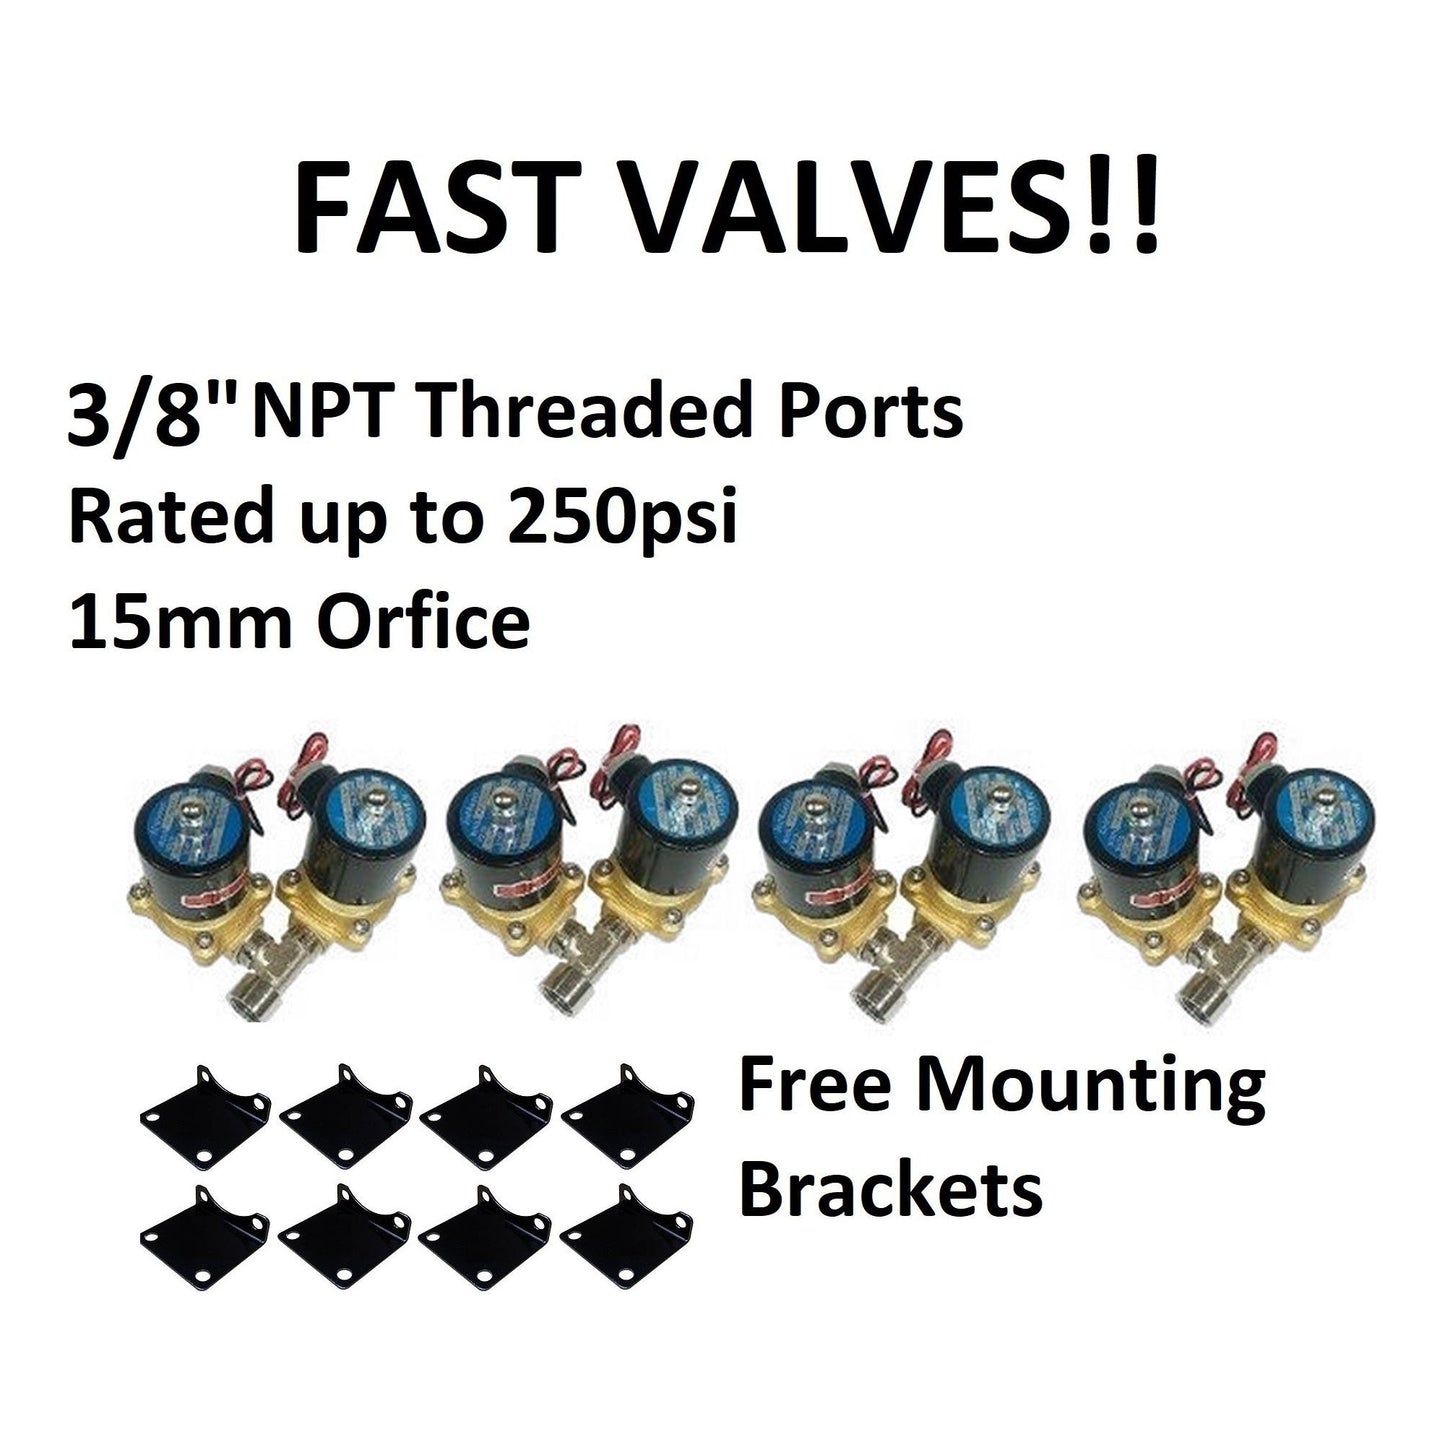 Fast flow brass valves with mounts with free mounting brackets